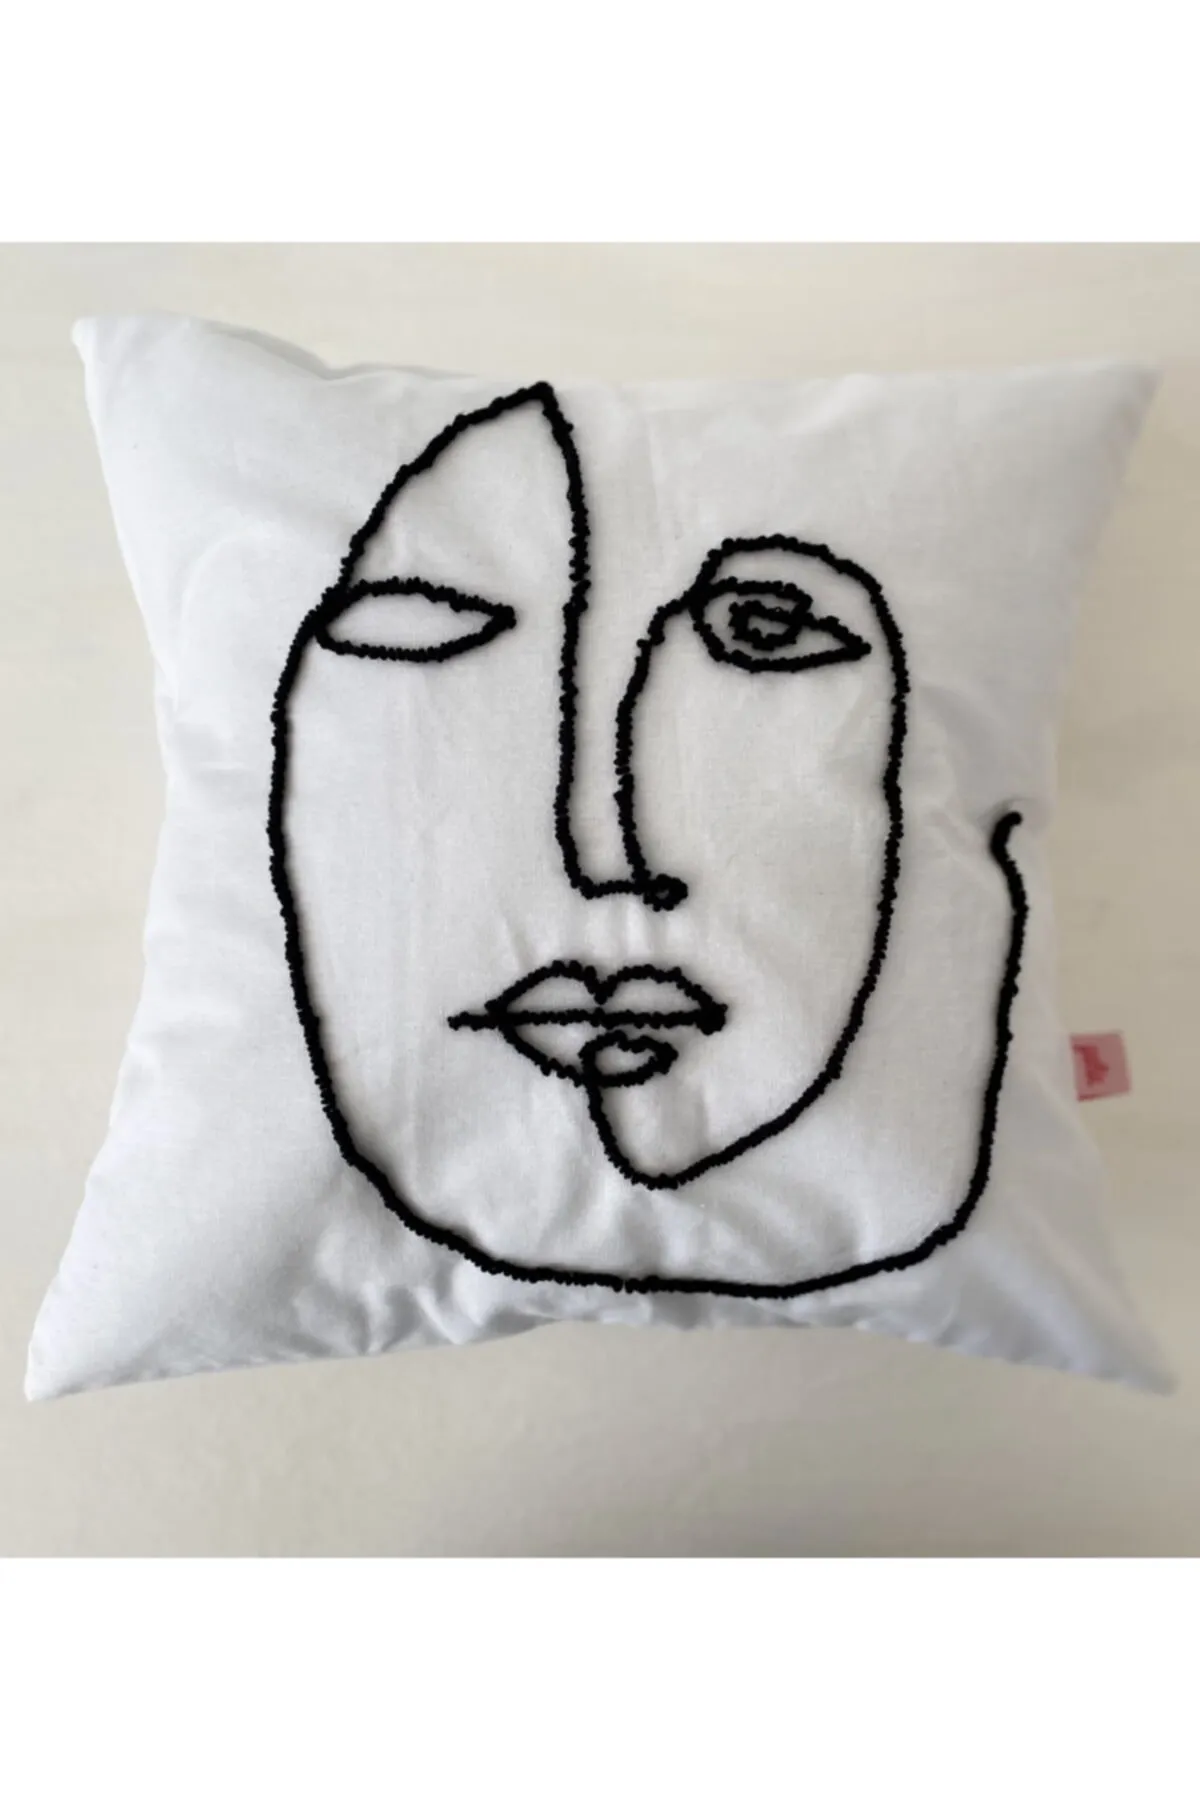 Mija One Line Art Punch Cushion Pillow Cover White